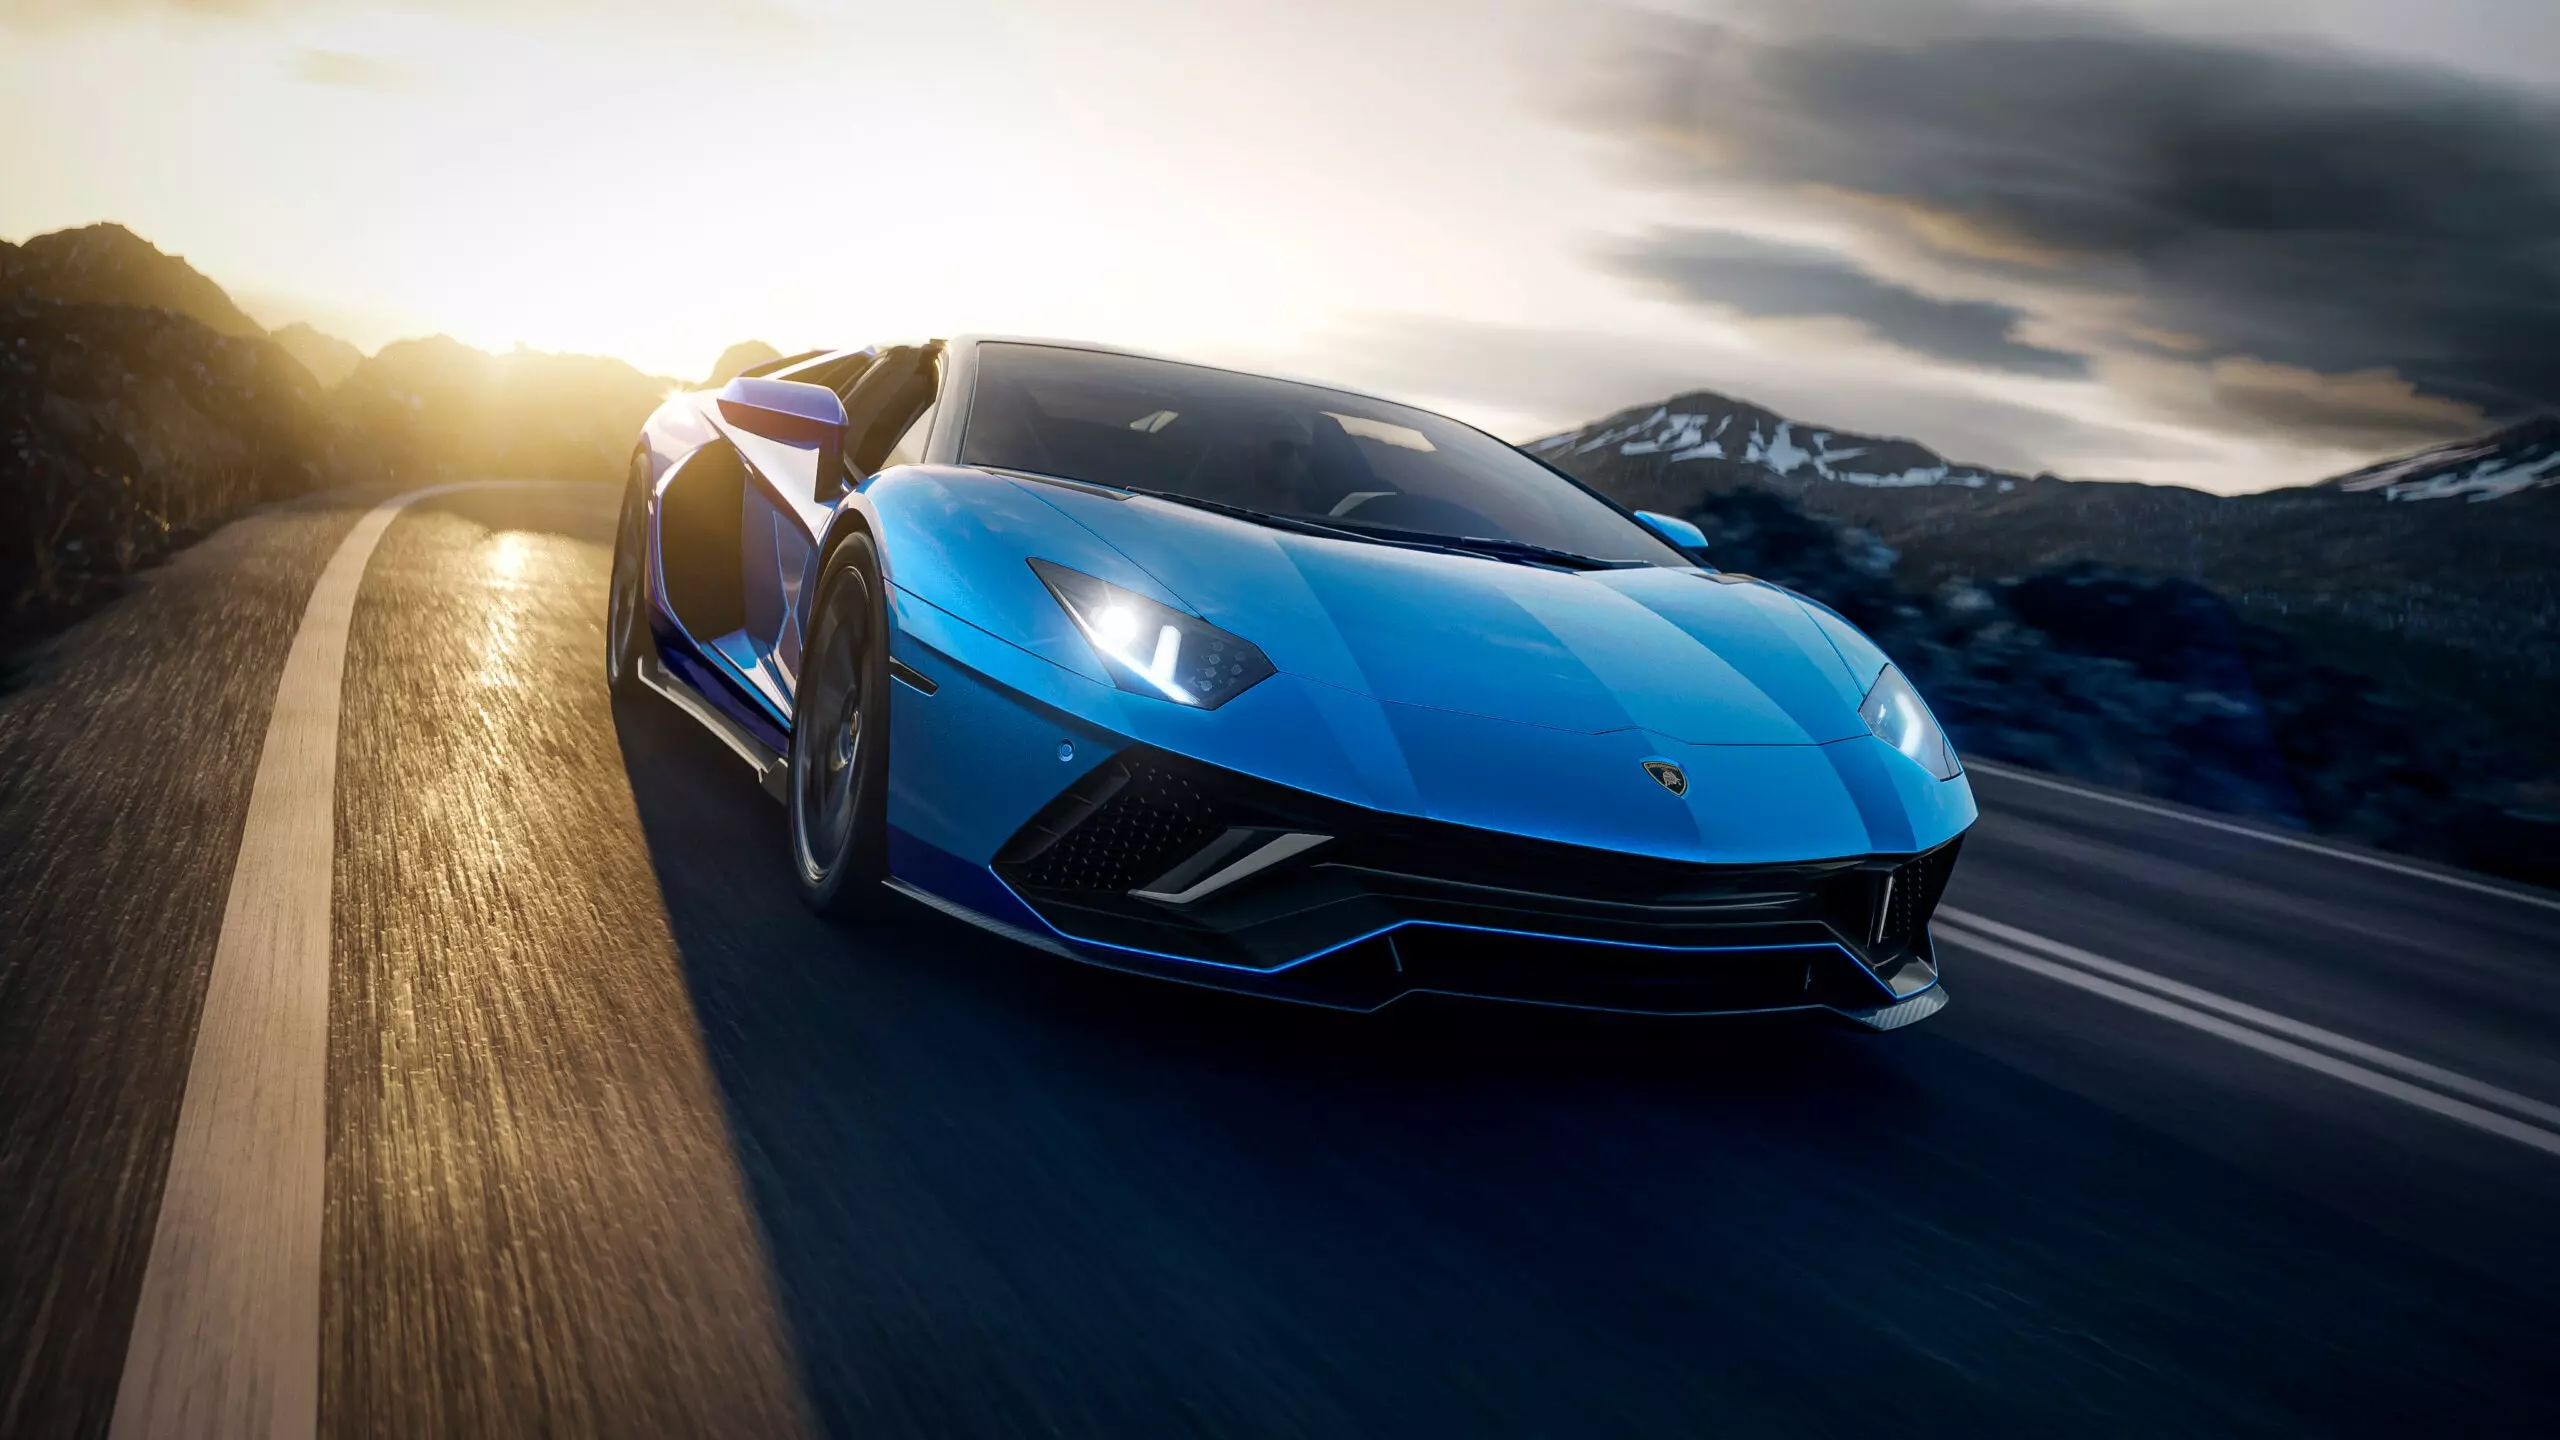 Lamborghini’s ‘Ultimae’ Photo Album Has Classic Need for Speed Vibes and I Really Like It | Autance